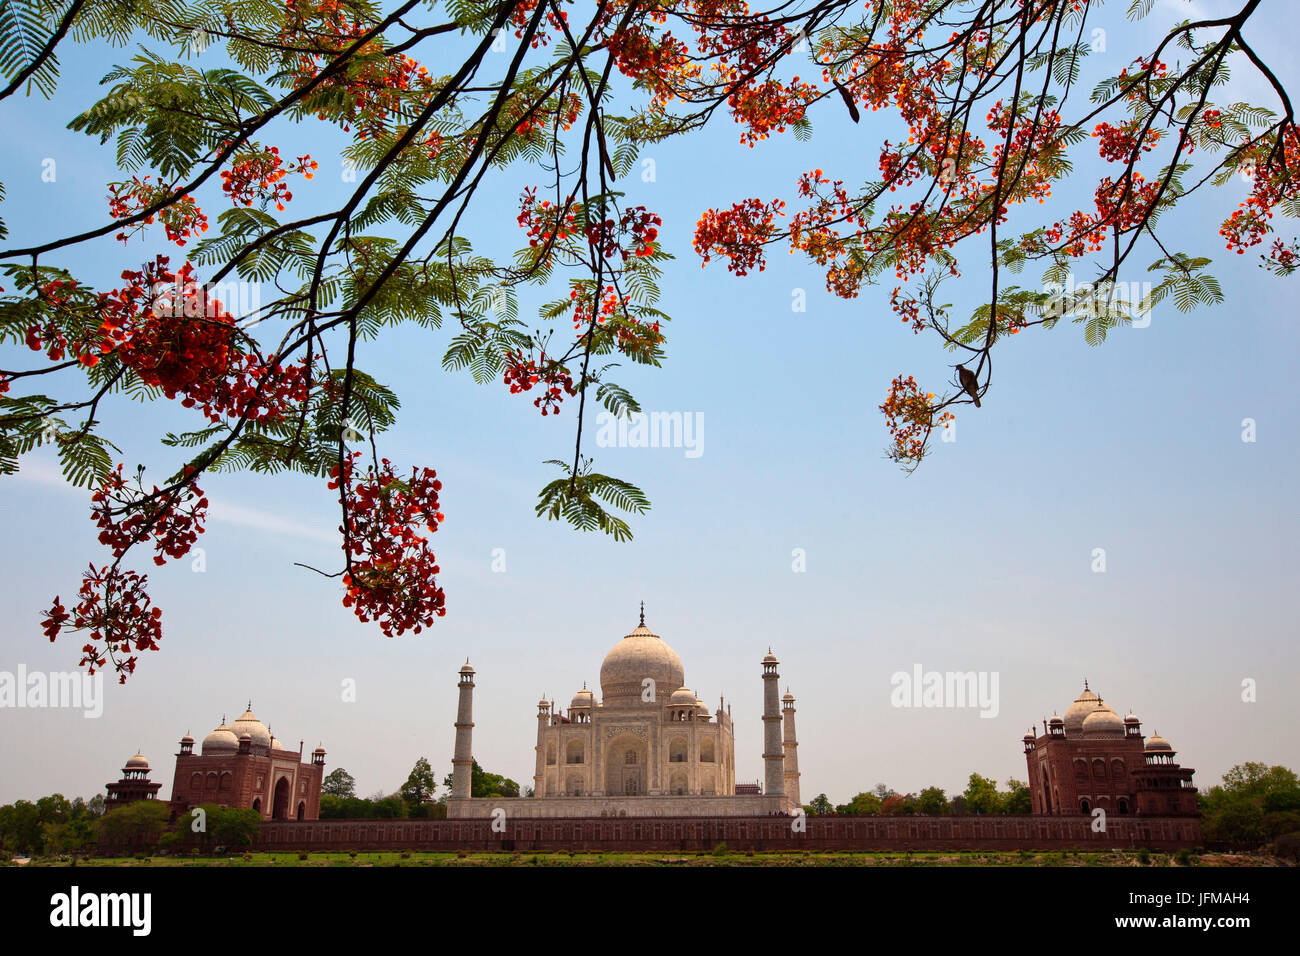 The magnificent Taj Mahal is one of the Seven Wonders of the World and is one UNESCO World Heritage Site, It is a white marble mausoleum located in Agra, India, built by Mughal emperor Shah Jahan in memory of his third wife, Mumtaz Mahal India Stock Photo